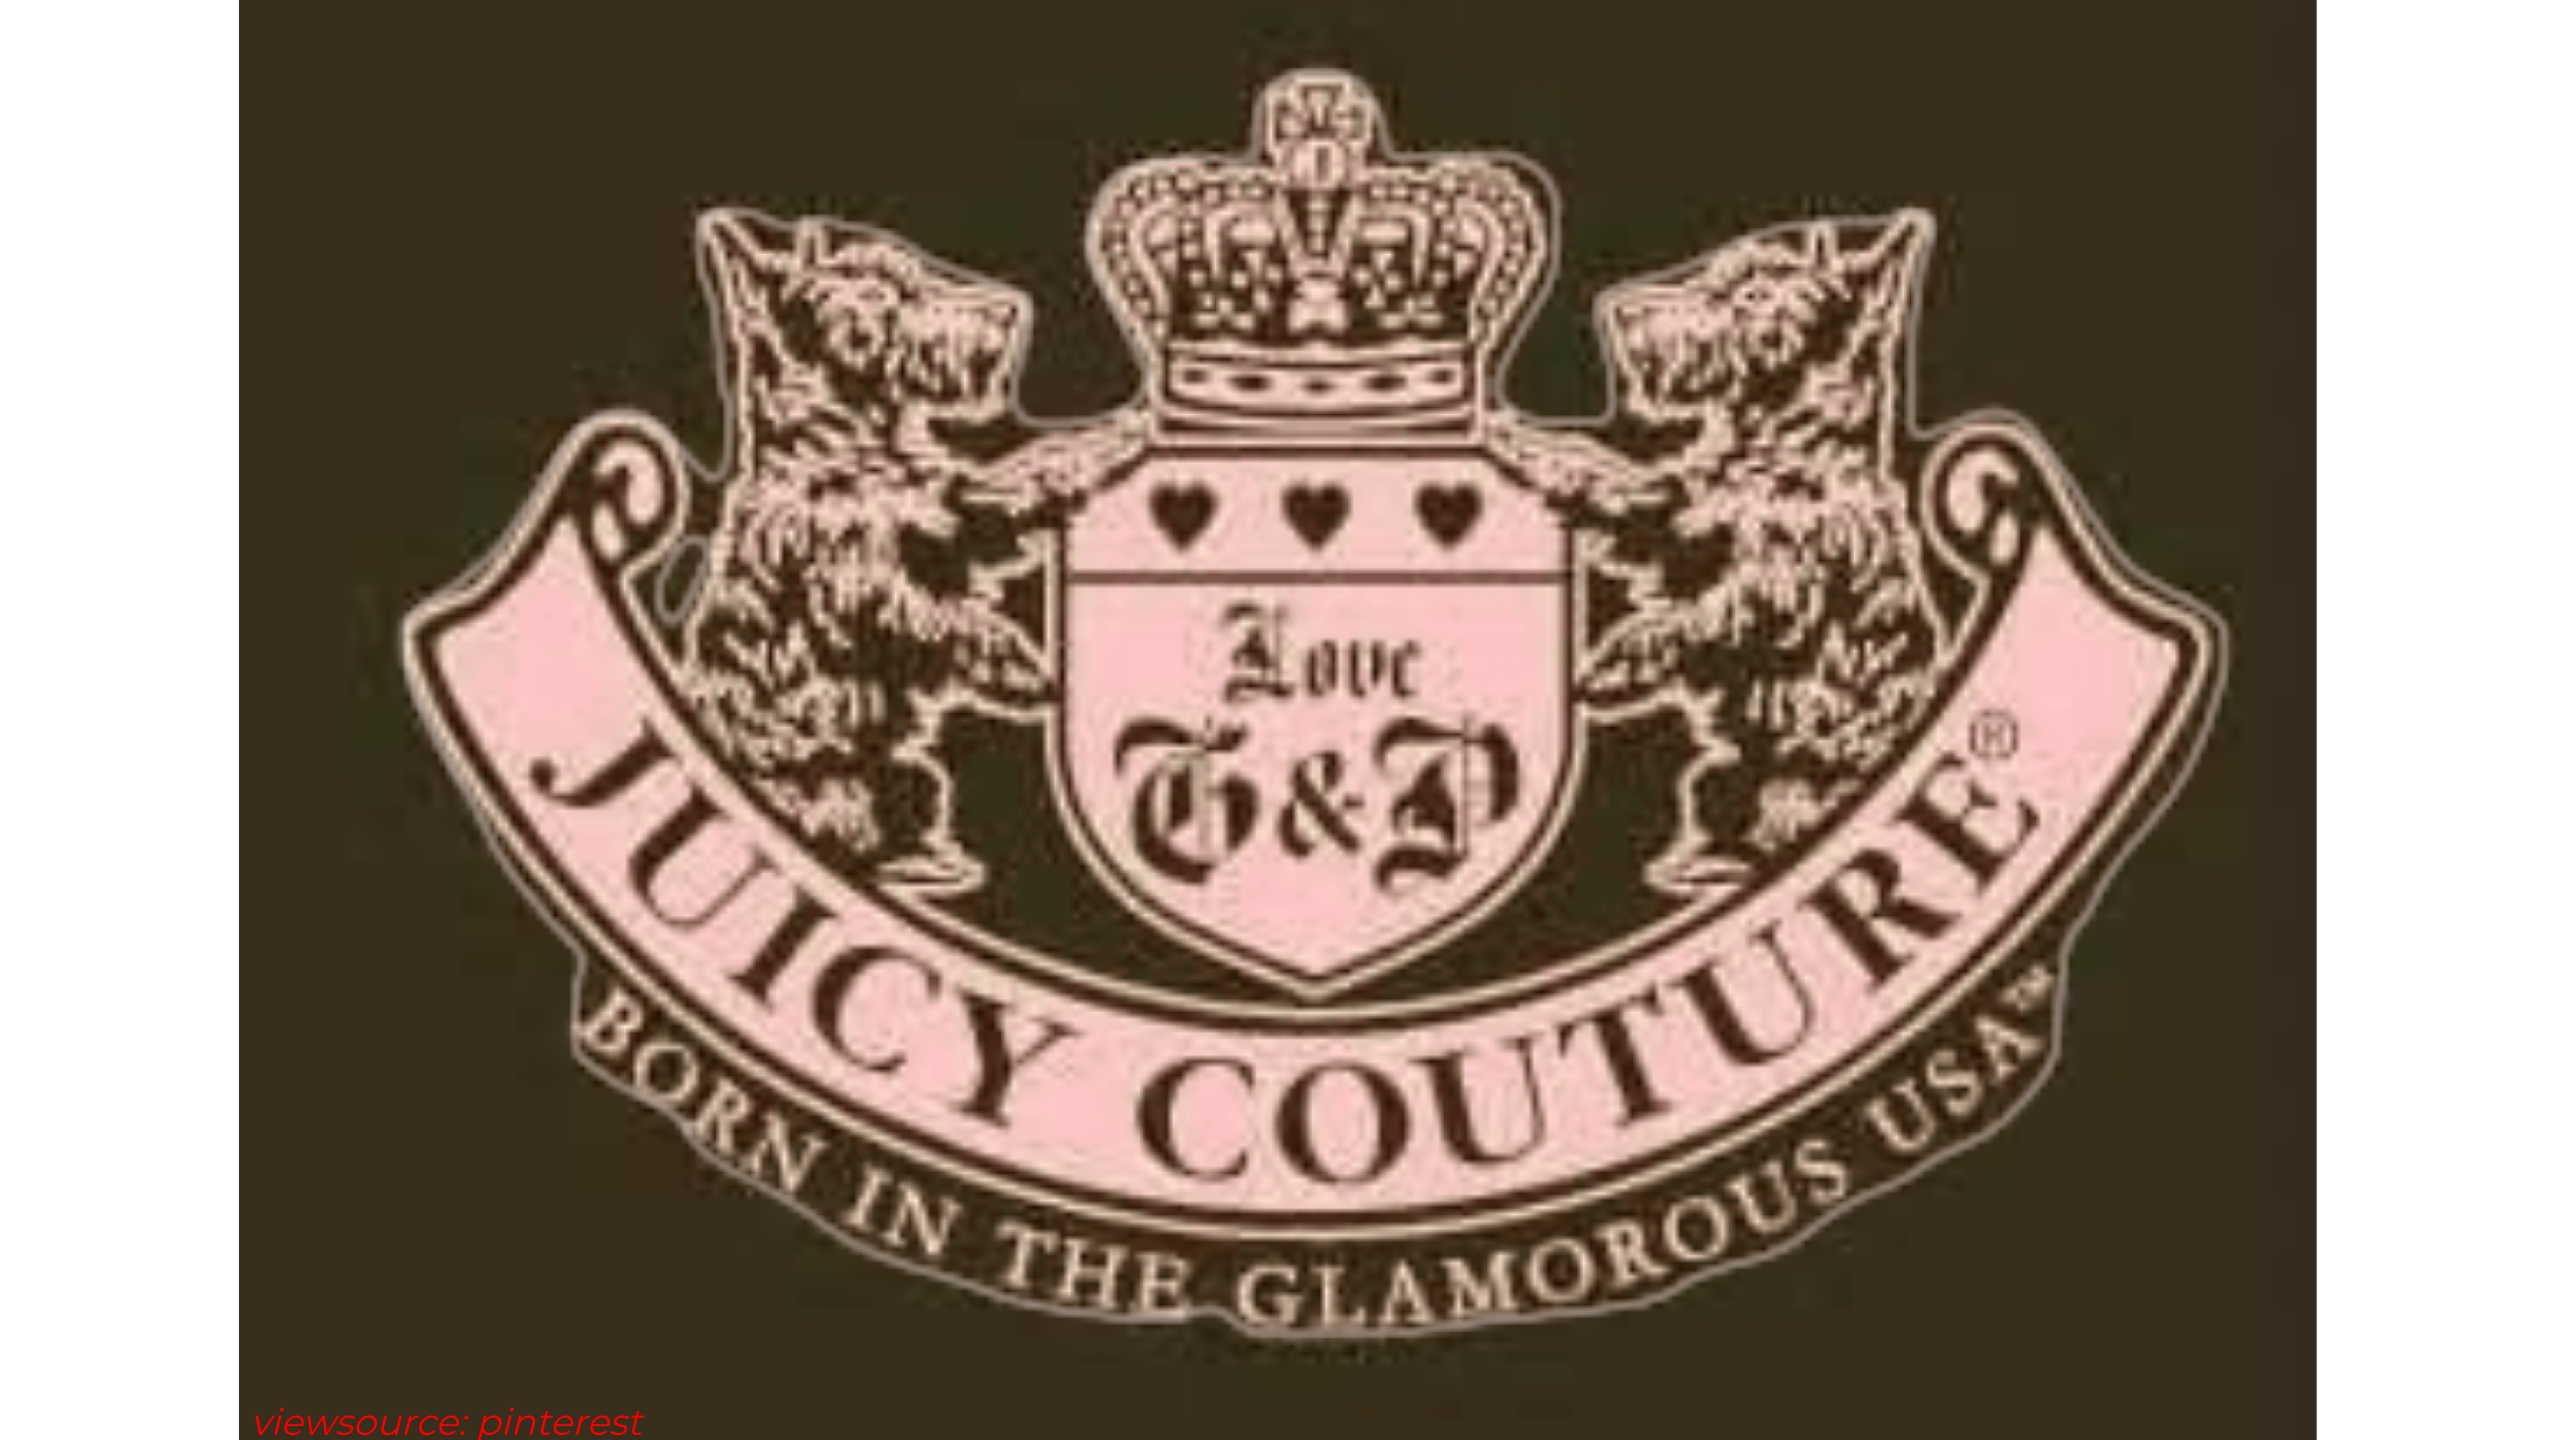 Juicy Couture's